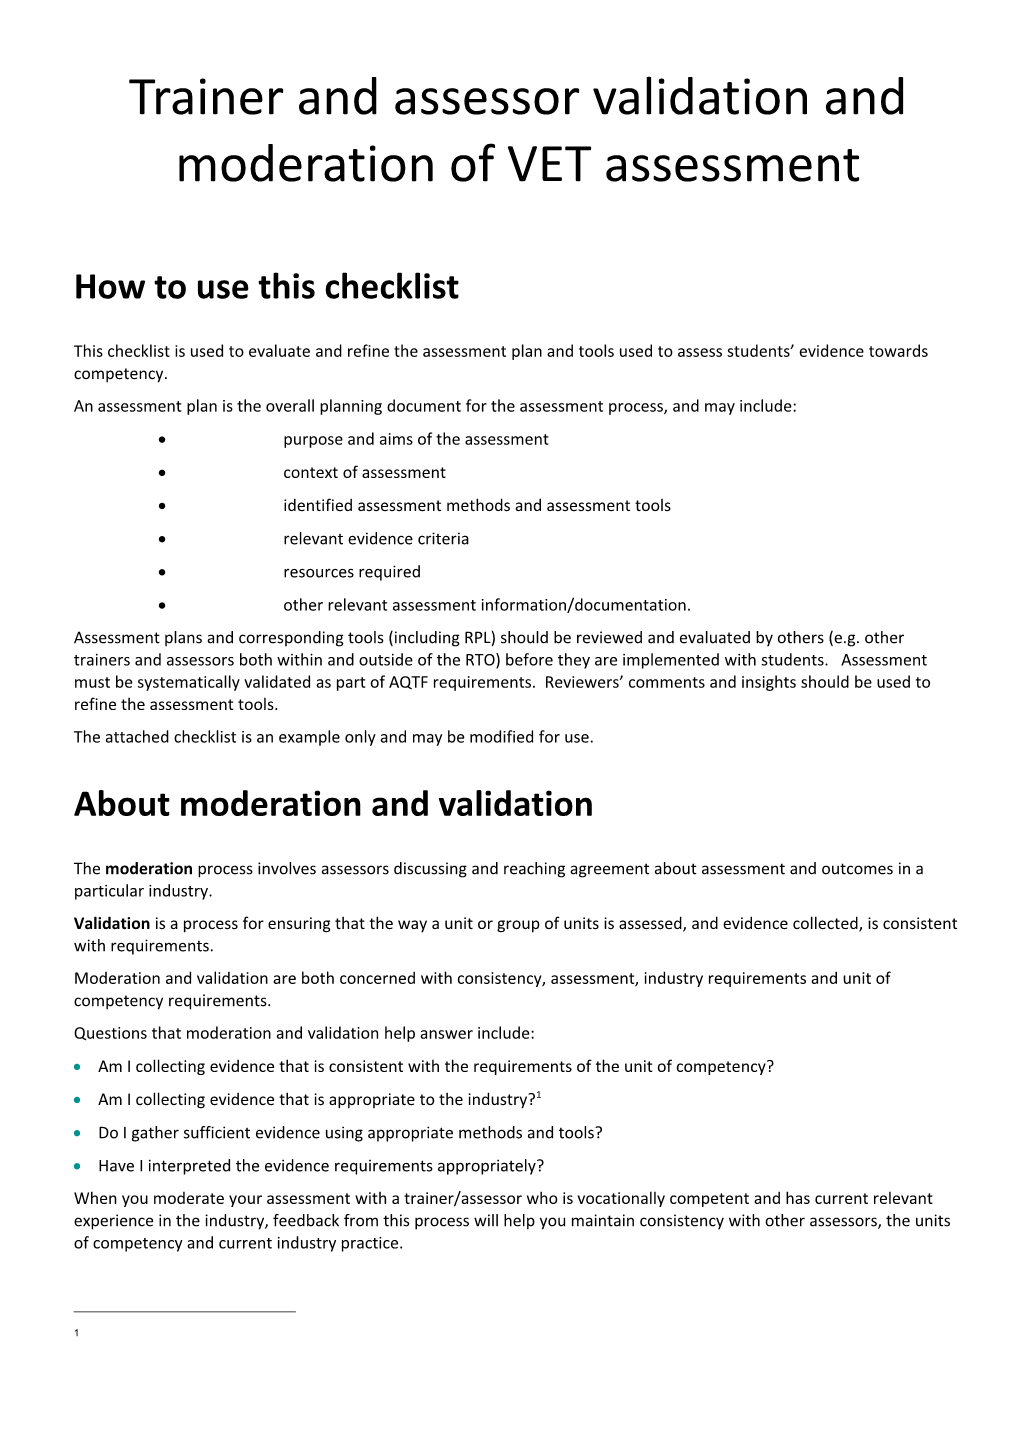 Traner and Assessor Validation and Moderation of VET Assessment: a Checklist for School Rtos